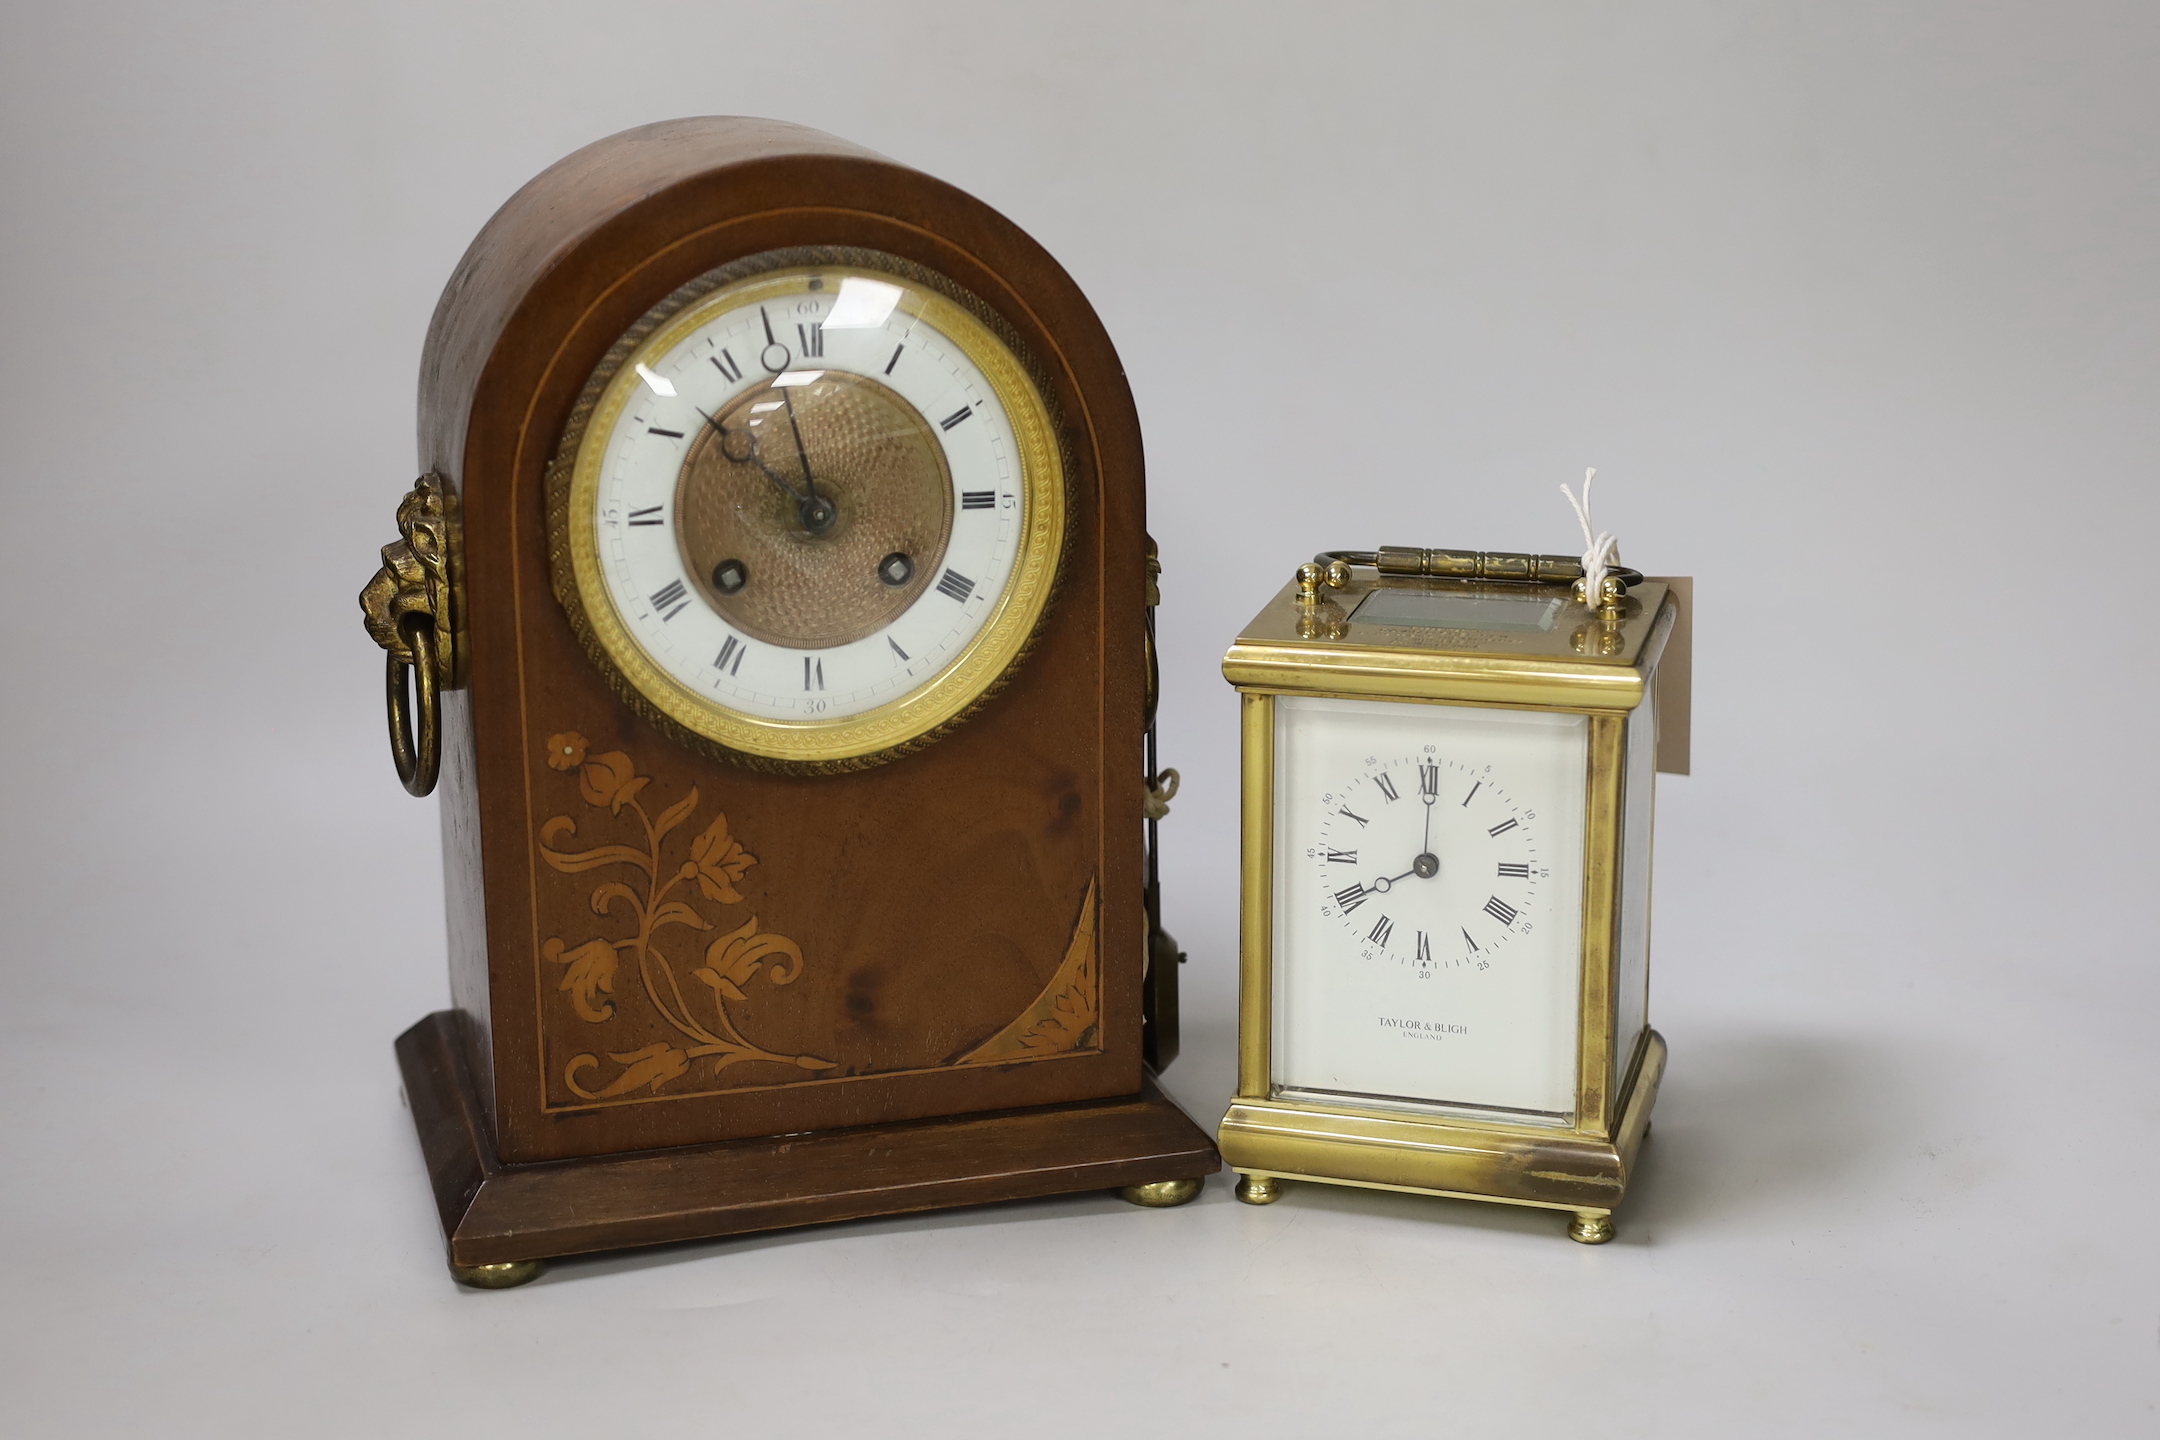 A brass presentation carriage clock together with an inlaid mahogany mantel clock